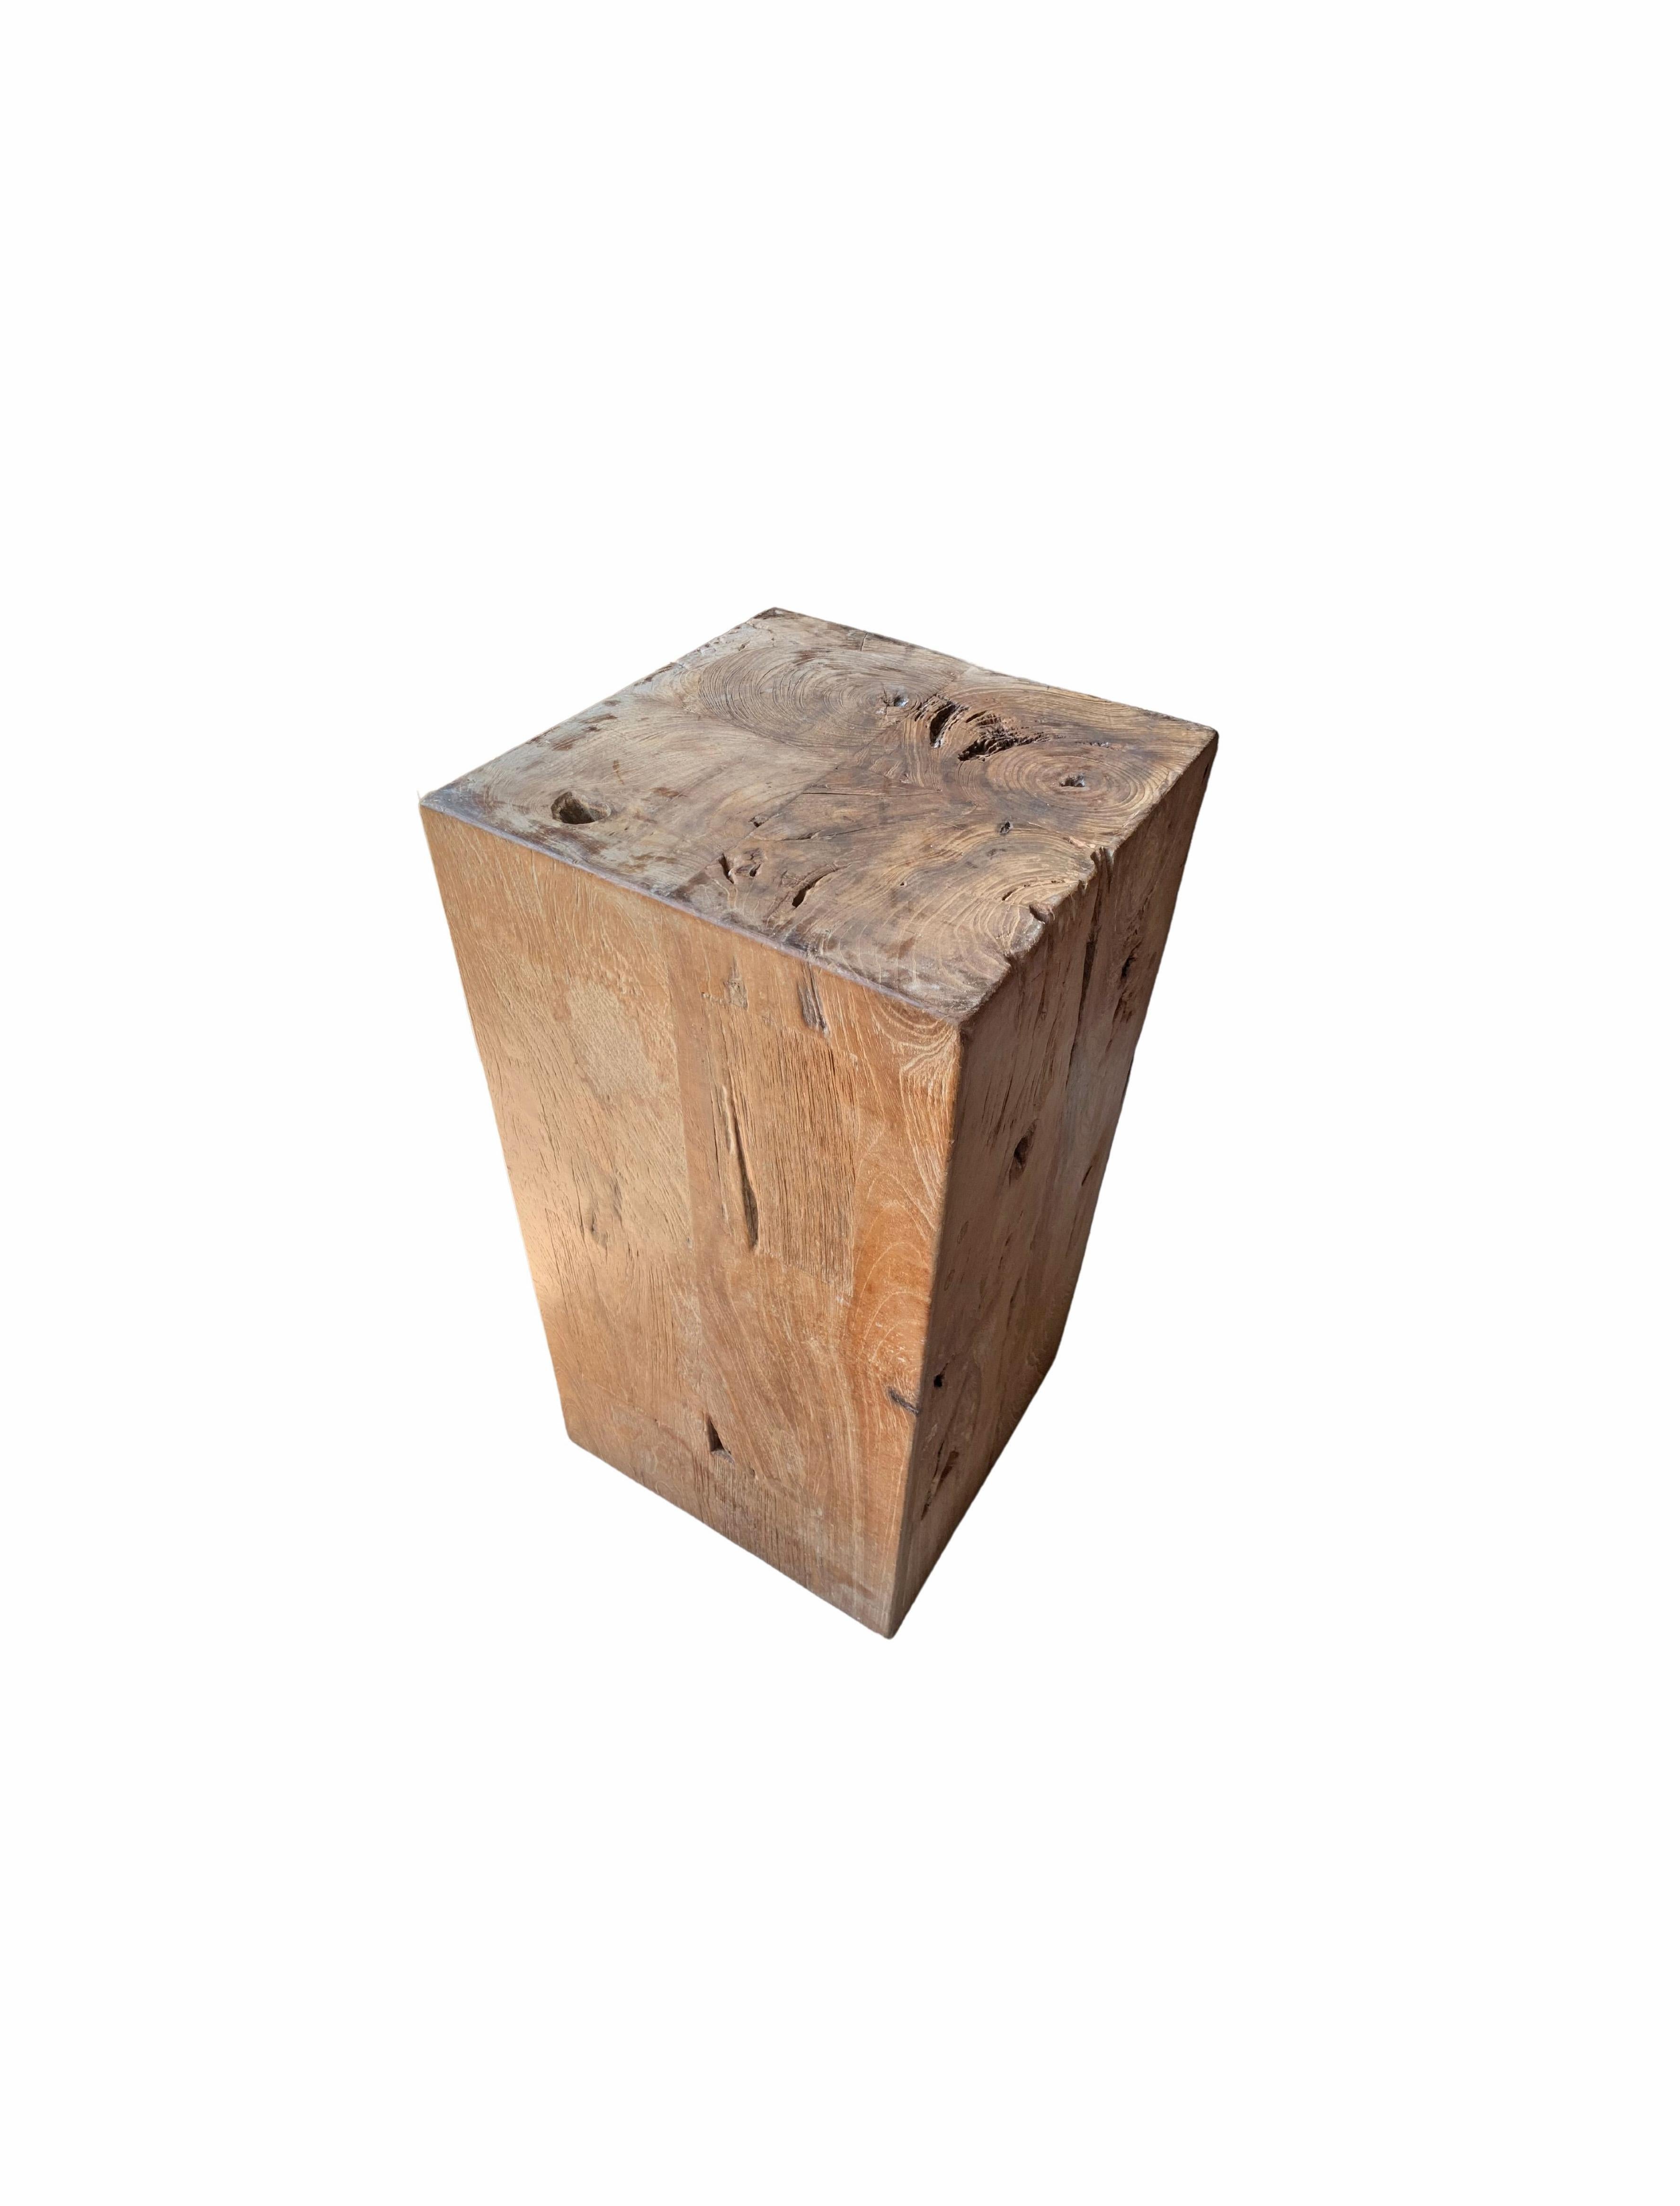 This teak wood pedestal was crafted by moulding 4 blocks of solid teak wood together. A strong and robust pedestal that is both beautiful on its own or displaying sculptures, vases or other items. A wonderfully organic item to brighten up any space.